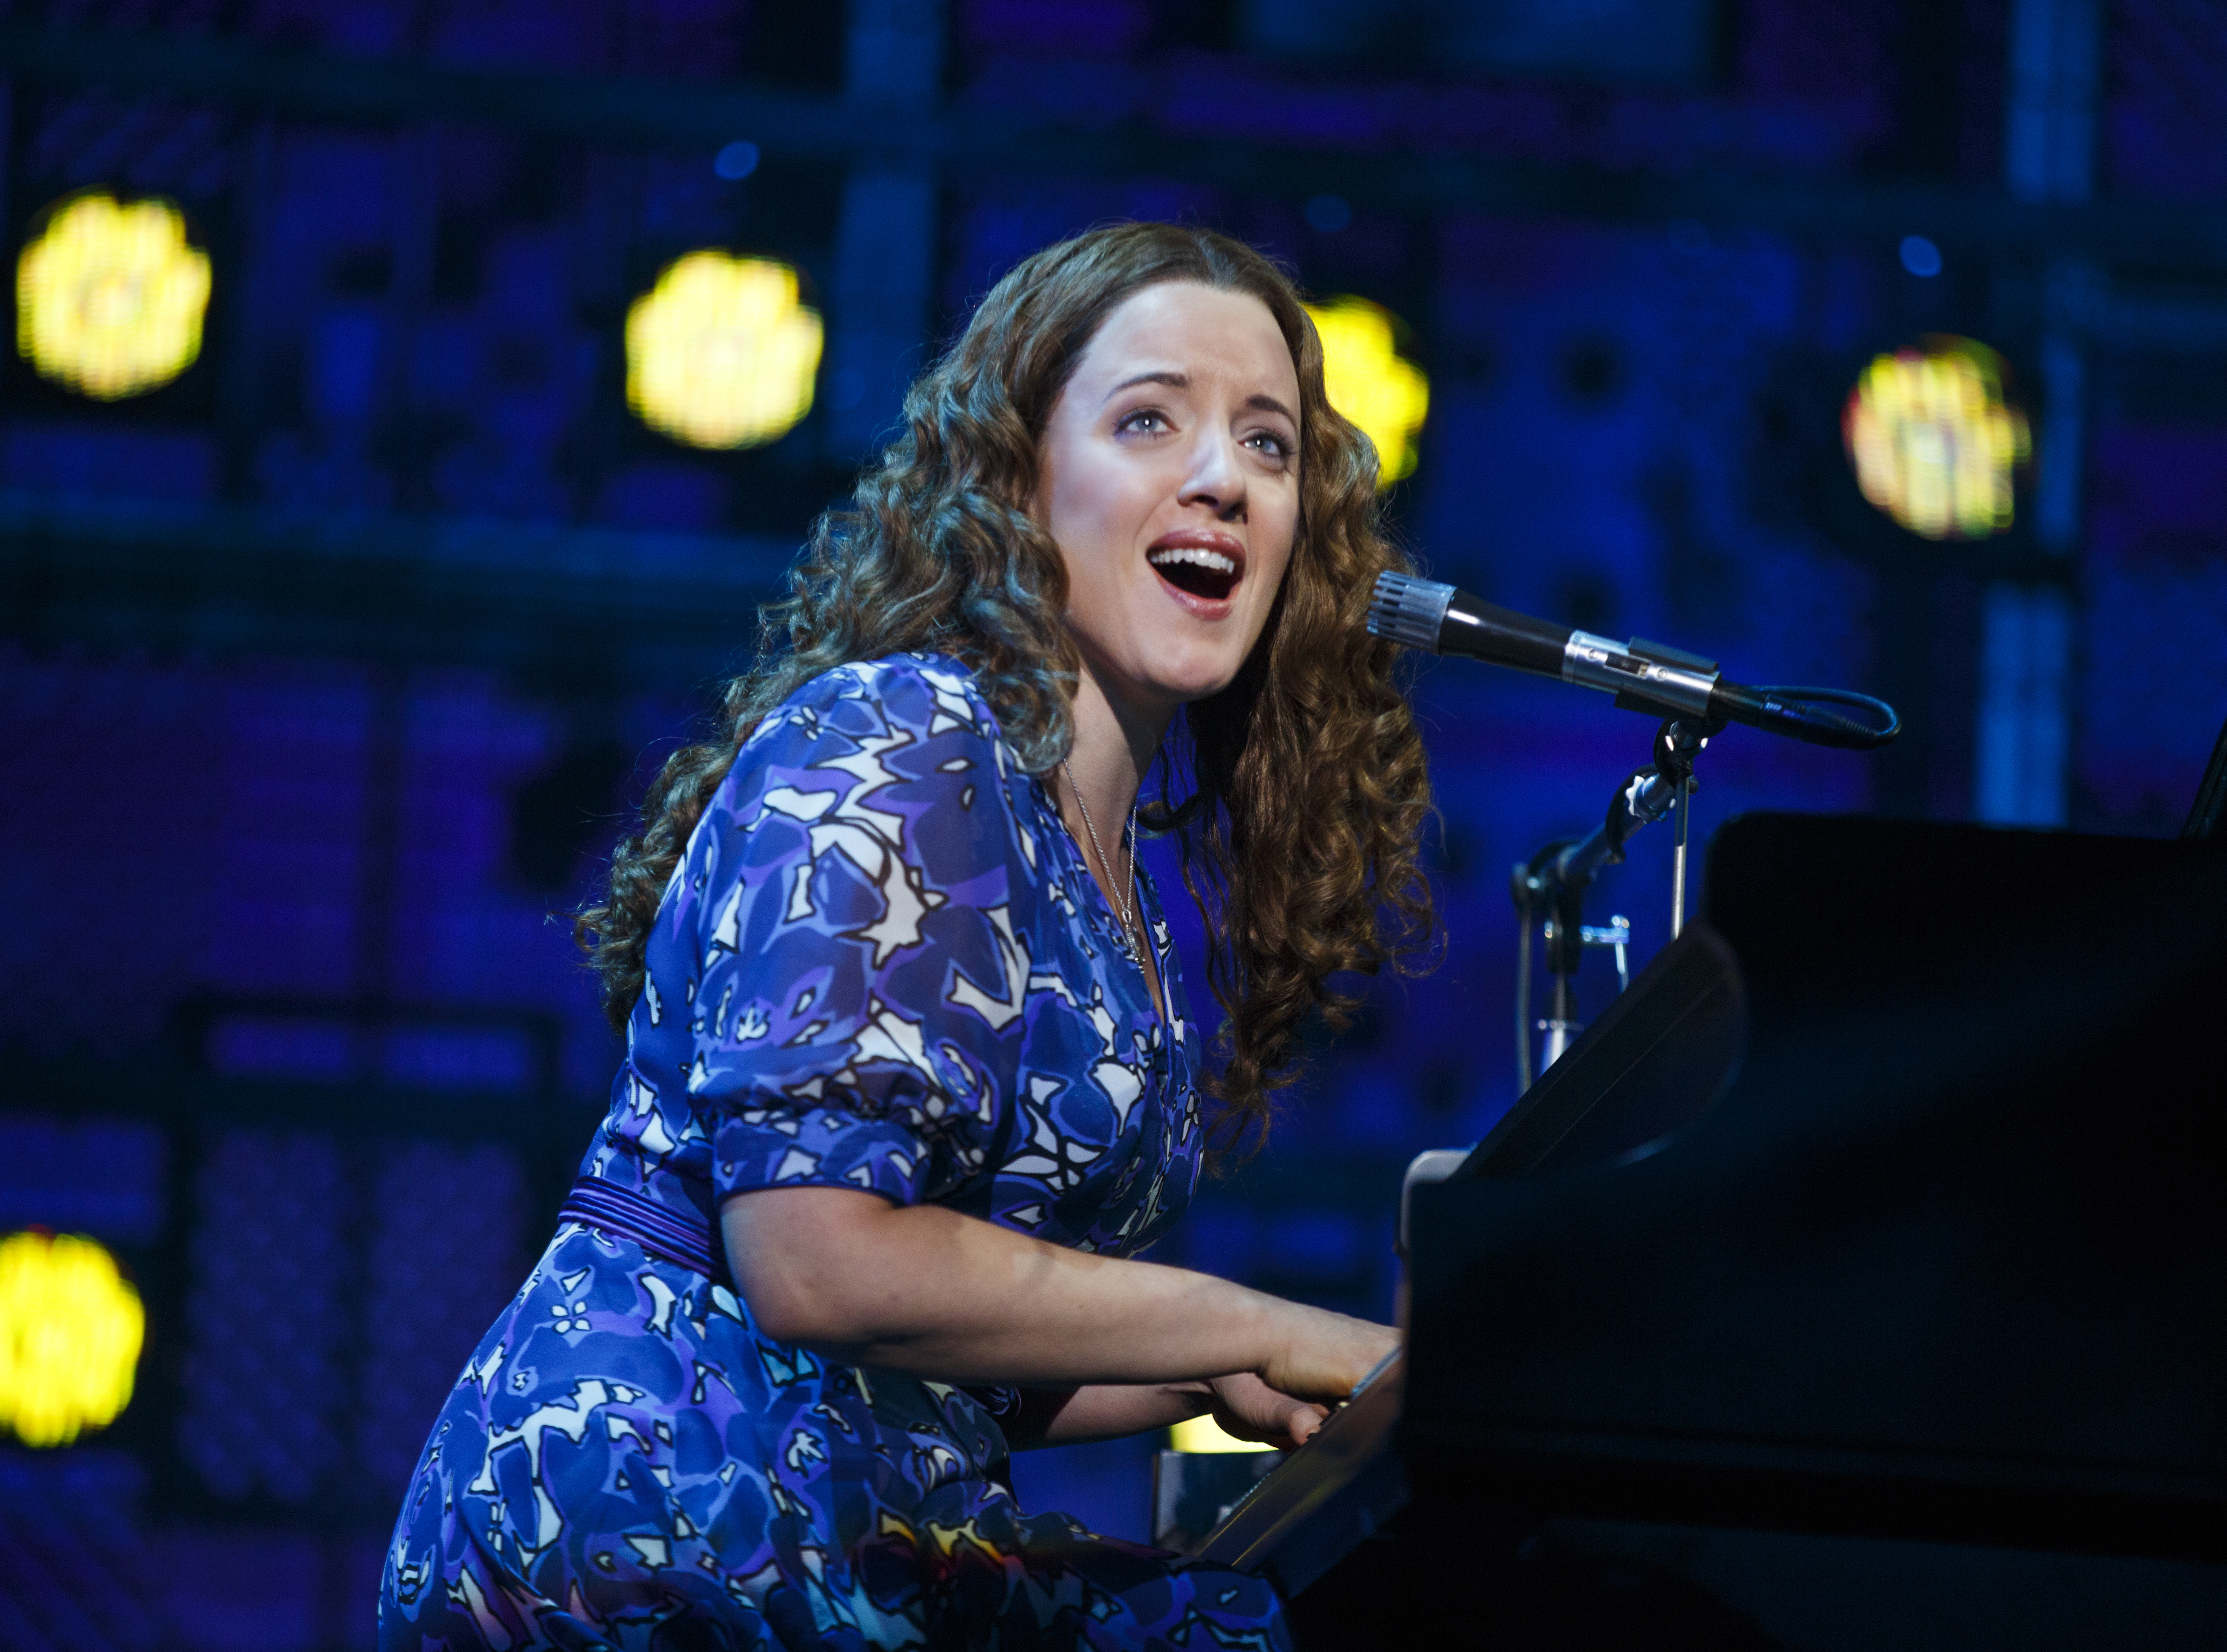 Broadway In Chicago Announces The Return of BEAUTIFUL 1 Broadway In Chicago and producers Paul Blake and Sony/ATV Music Publishing are thrilled to announce the First National Tour of Beautiful—The Carole King Musical, the smash hit musical about the early life and career of the legendary and groundbreaking singer/songwriter, will return to Chicago by popular demand December 5 – 31, 2017.